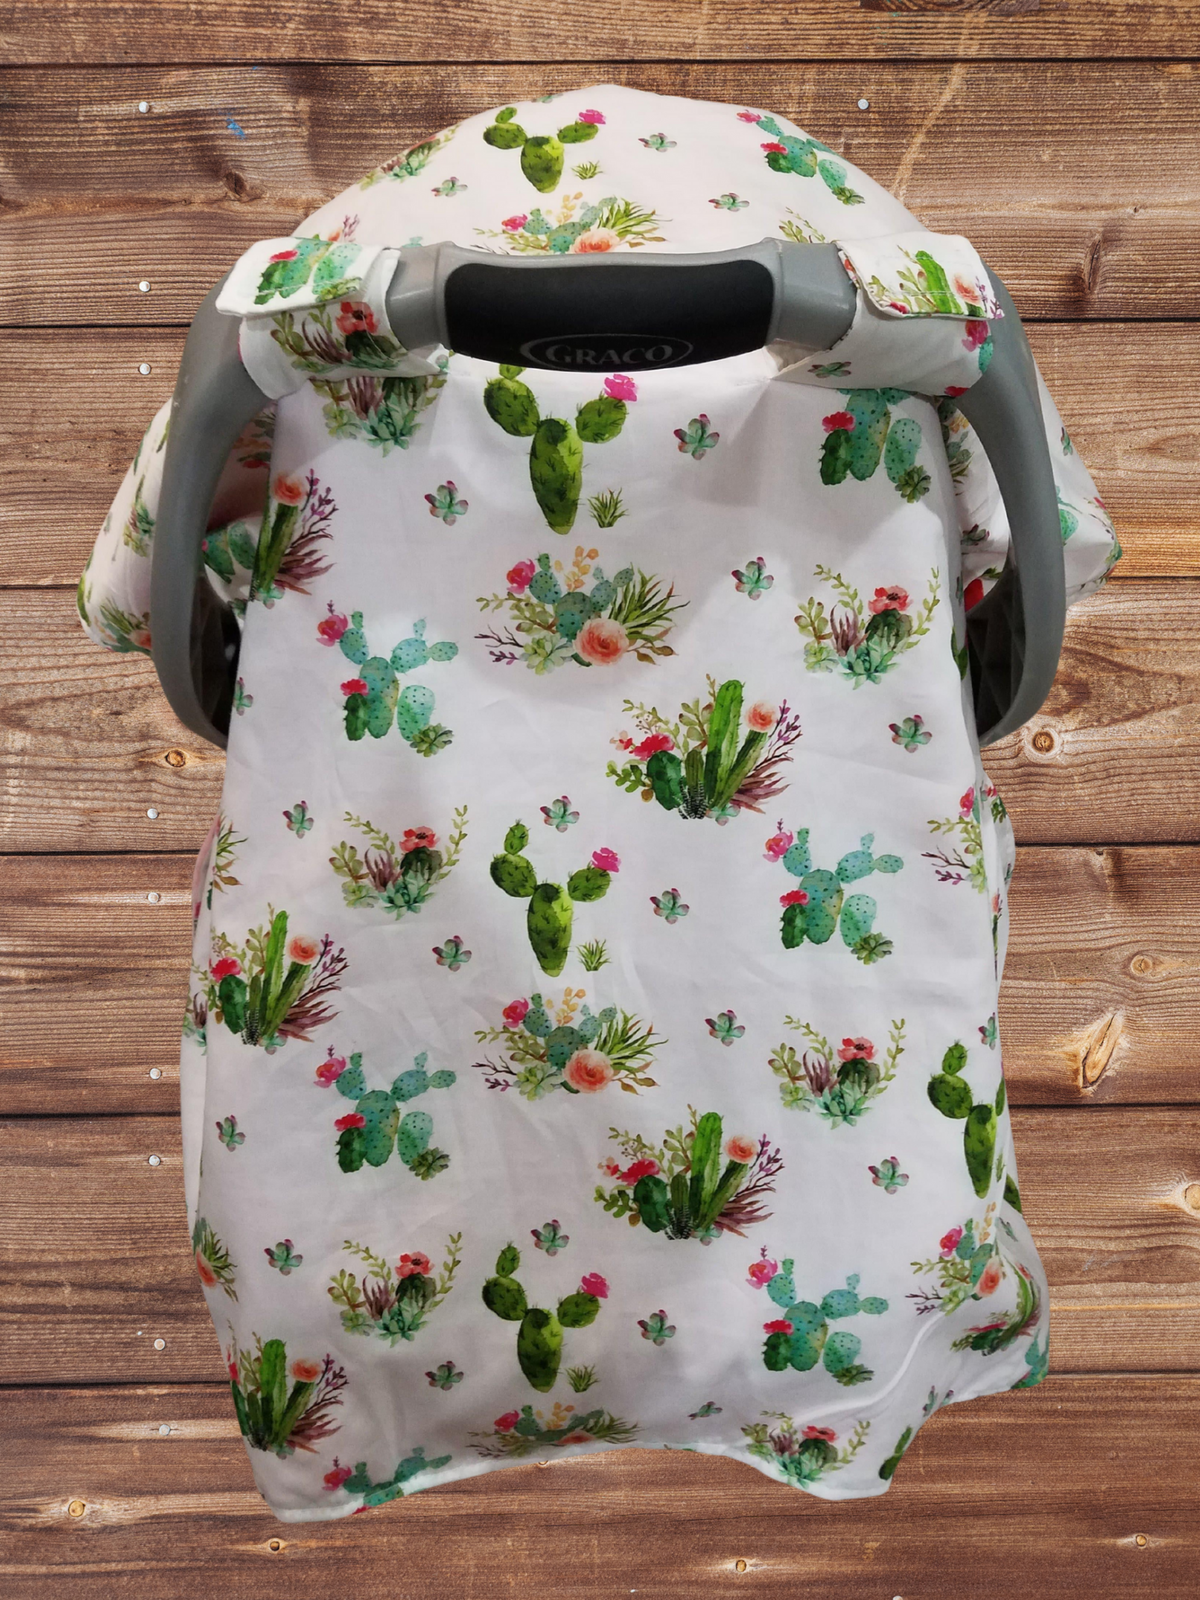 Carseat Tent - Floral Cactus Western Tent - DBC Baby Bedding Co 